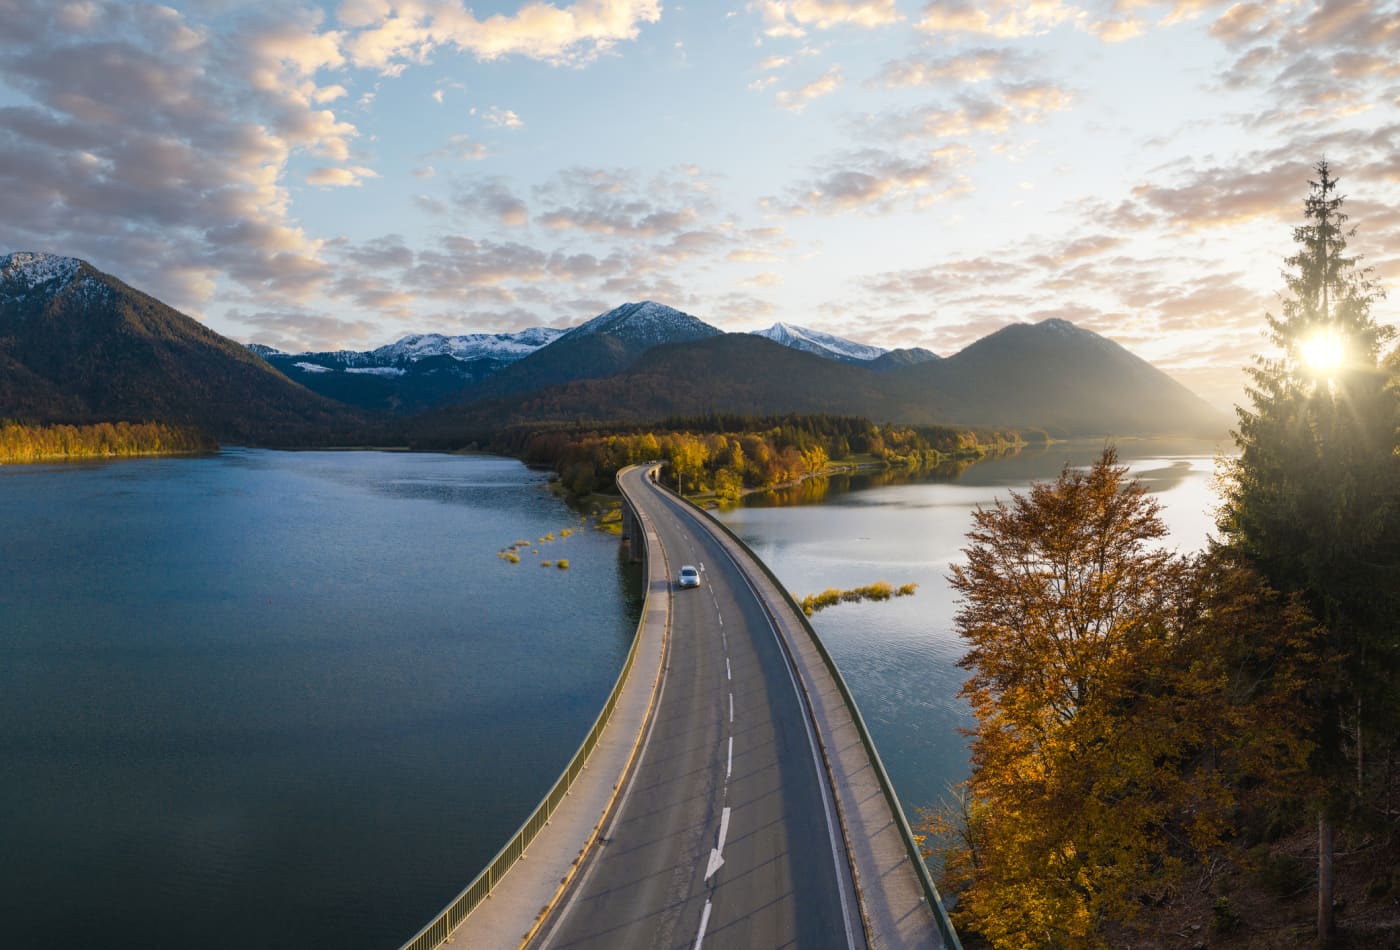 Out of 118 countries, these are the top 5 for road trips in 2022